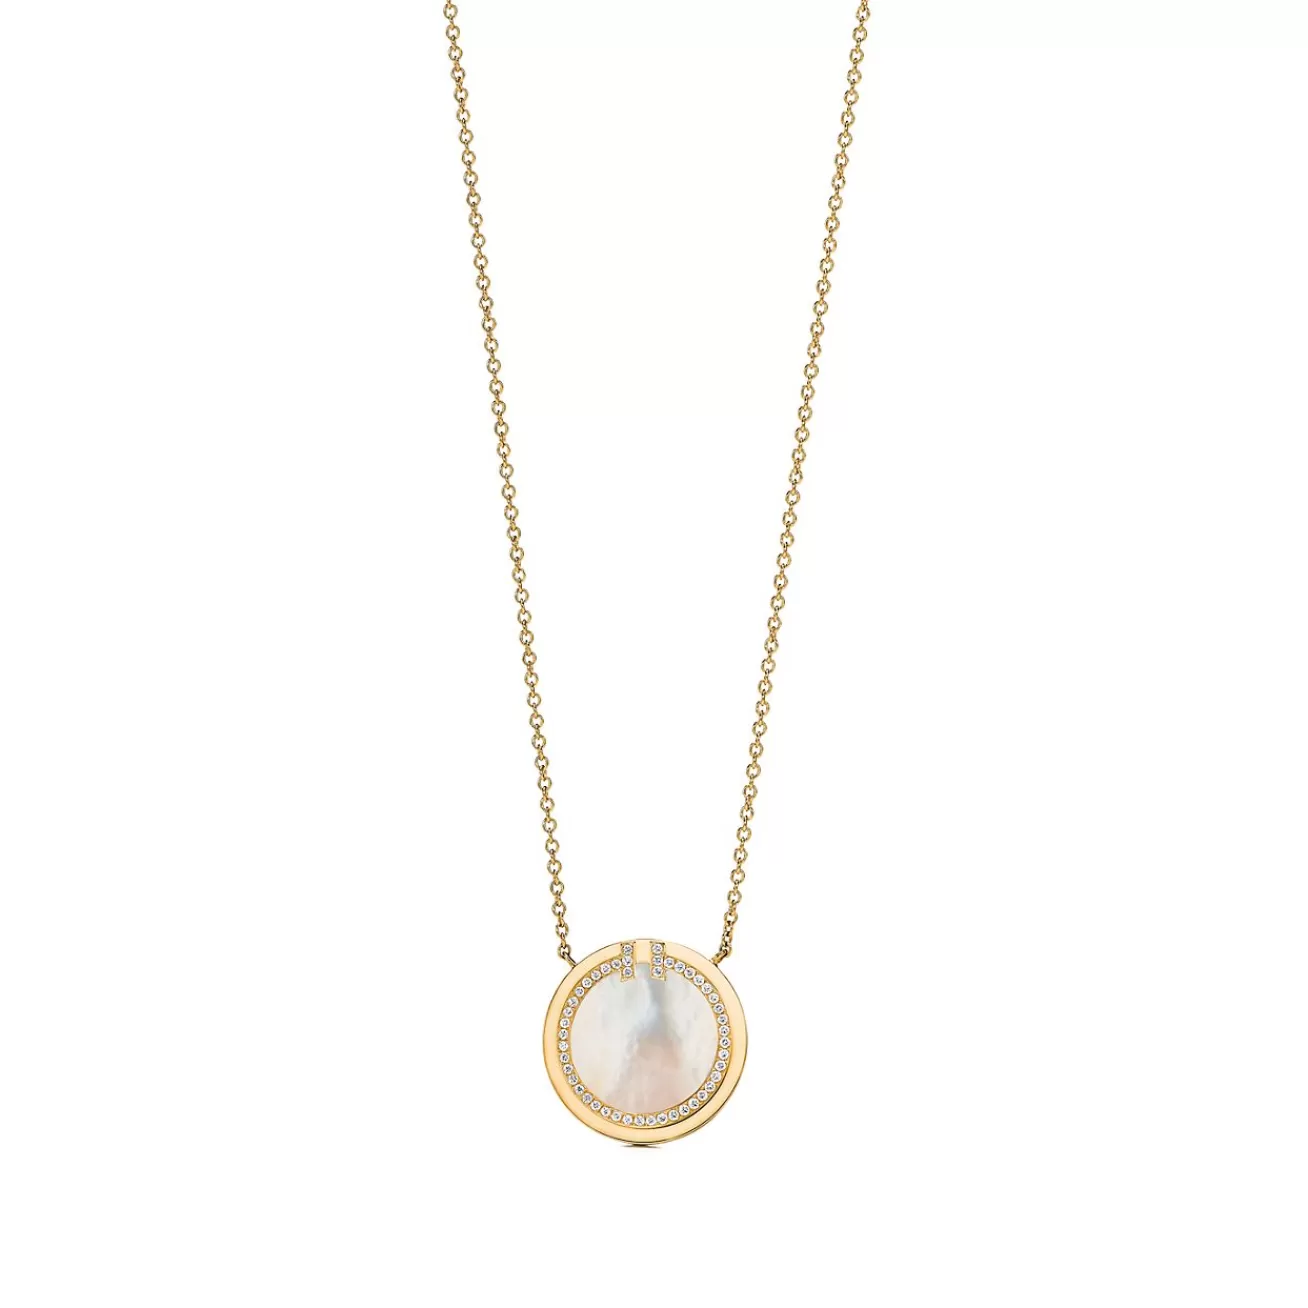 Tiffany & Co. Tiffany T diamond and mother-of-pearl circle pendant in 18k gold. | ^ Necklaces & Pendants | Gold Jewelry